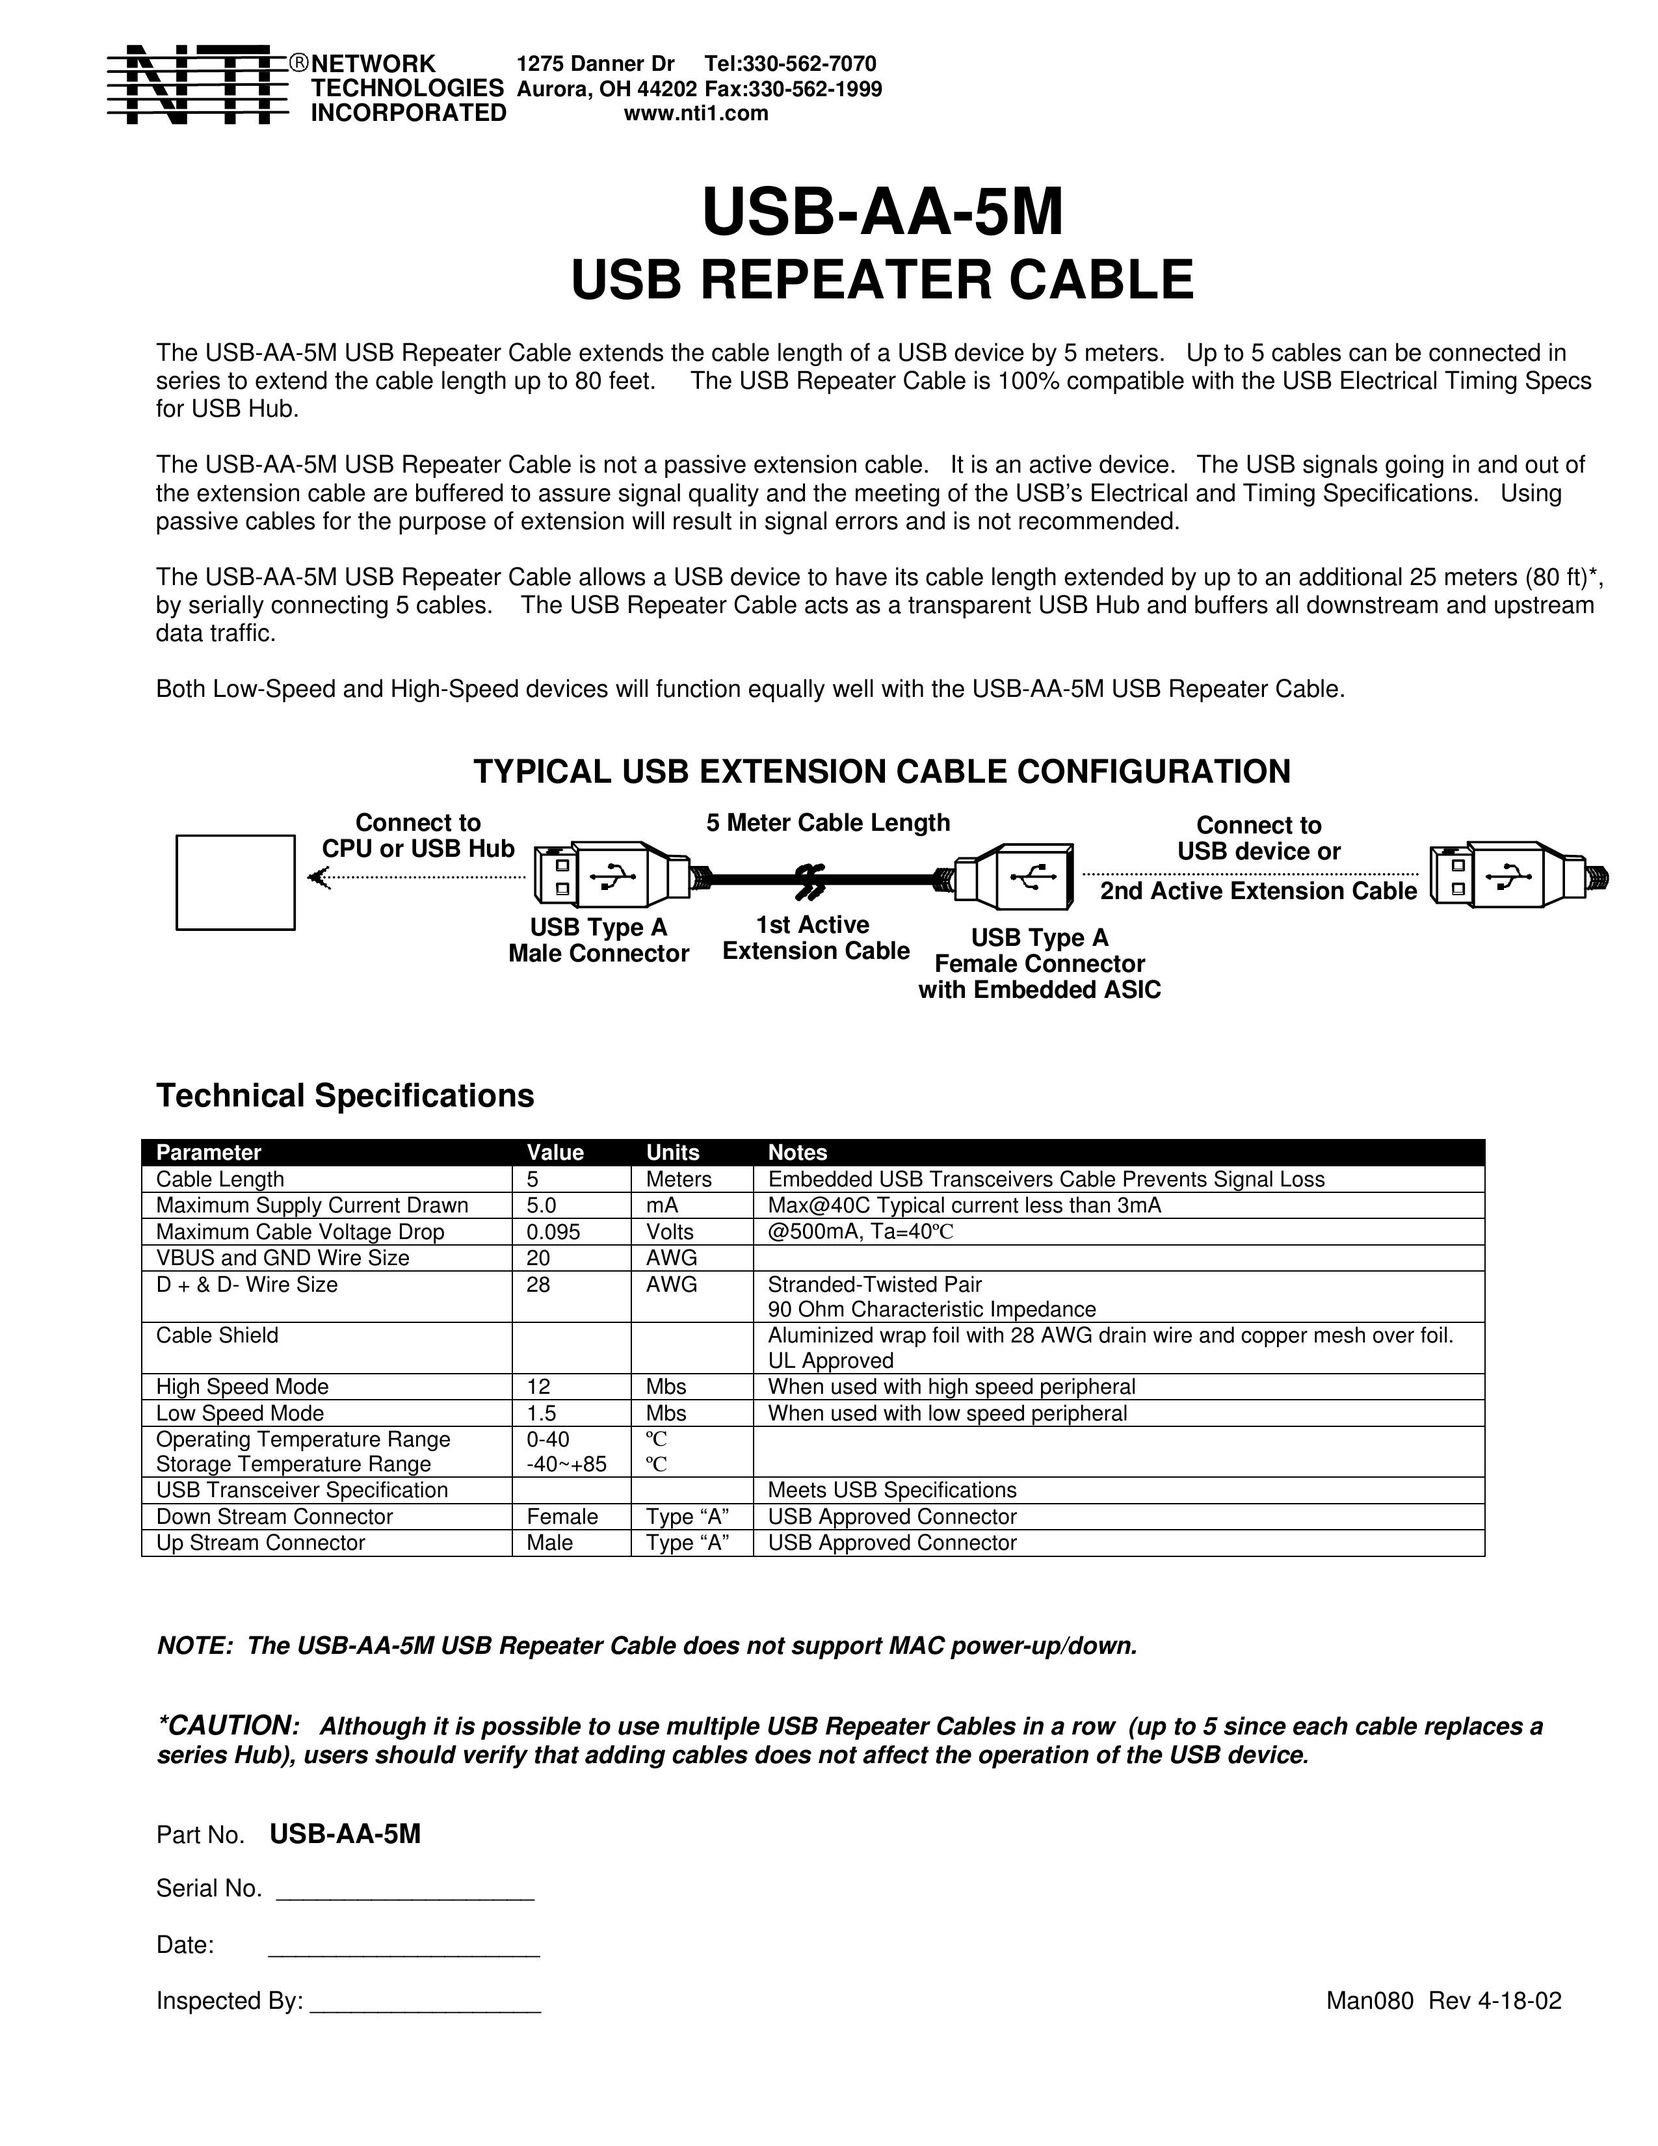 Video Products USB-AA-5M Computer Hardware User Manual